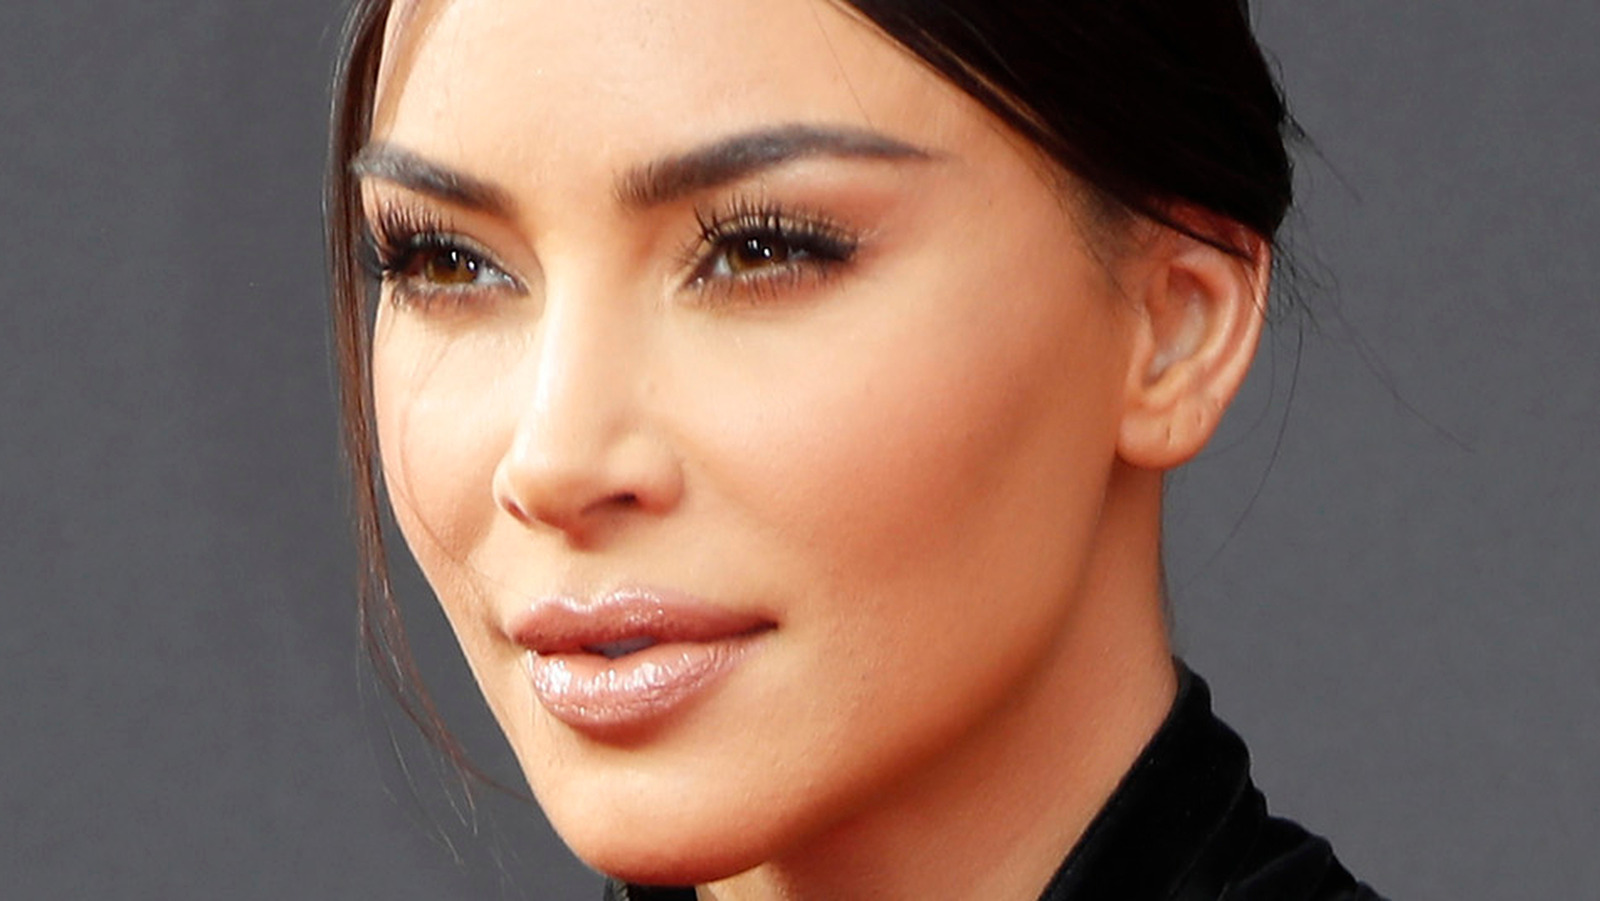 Here's Reportedly Why Kim Kardashian Covered Her Face at the Met